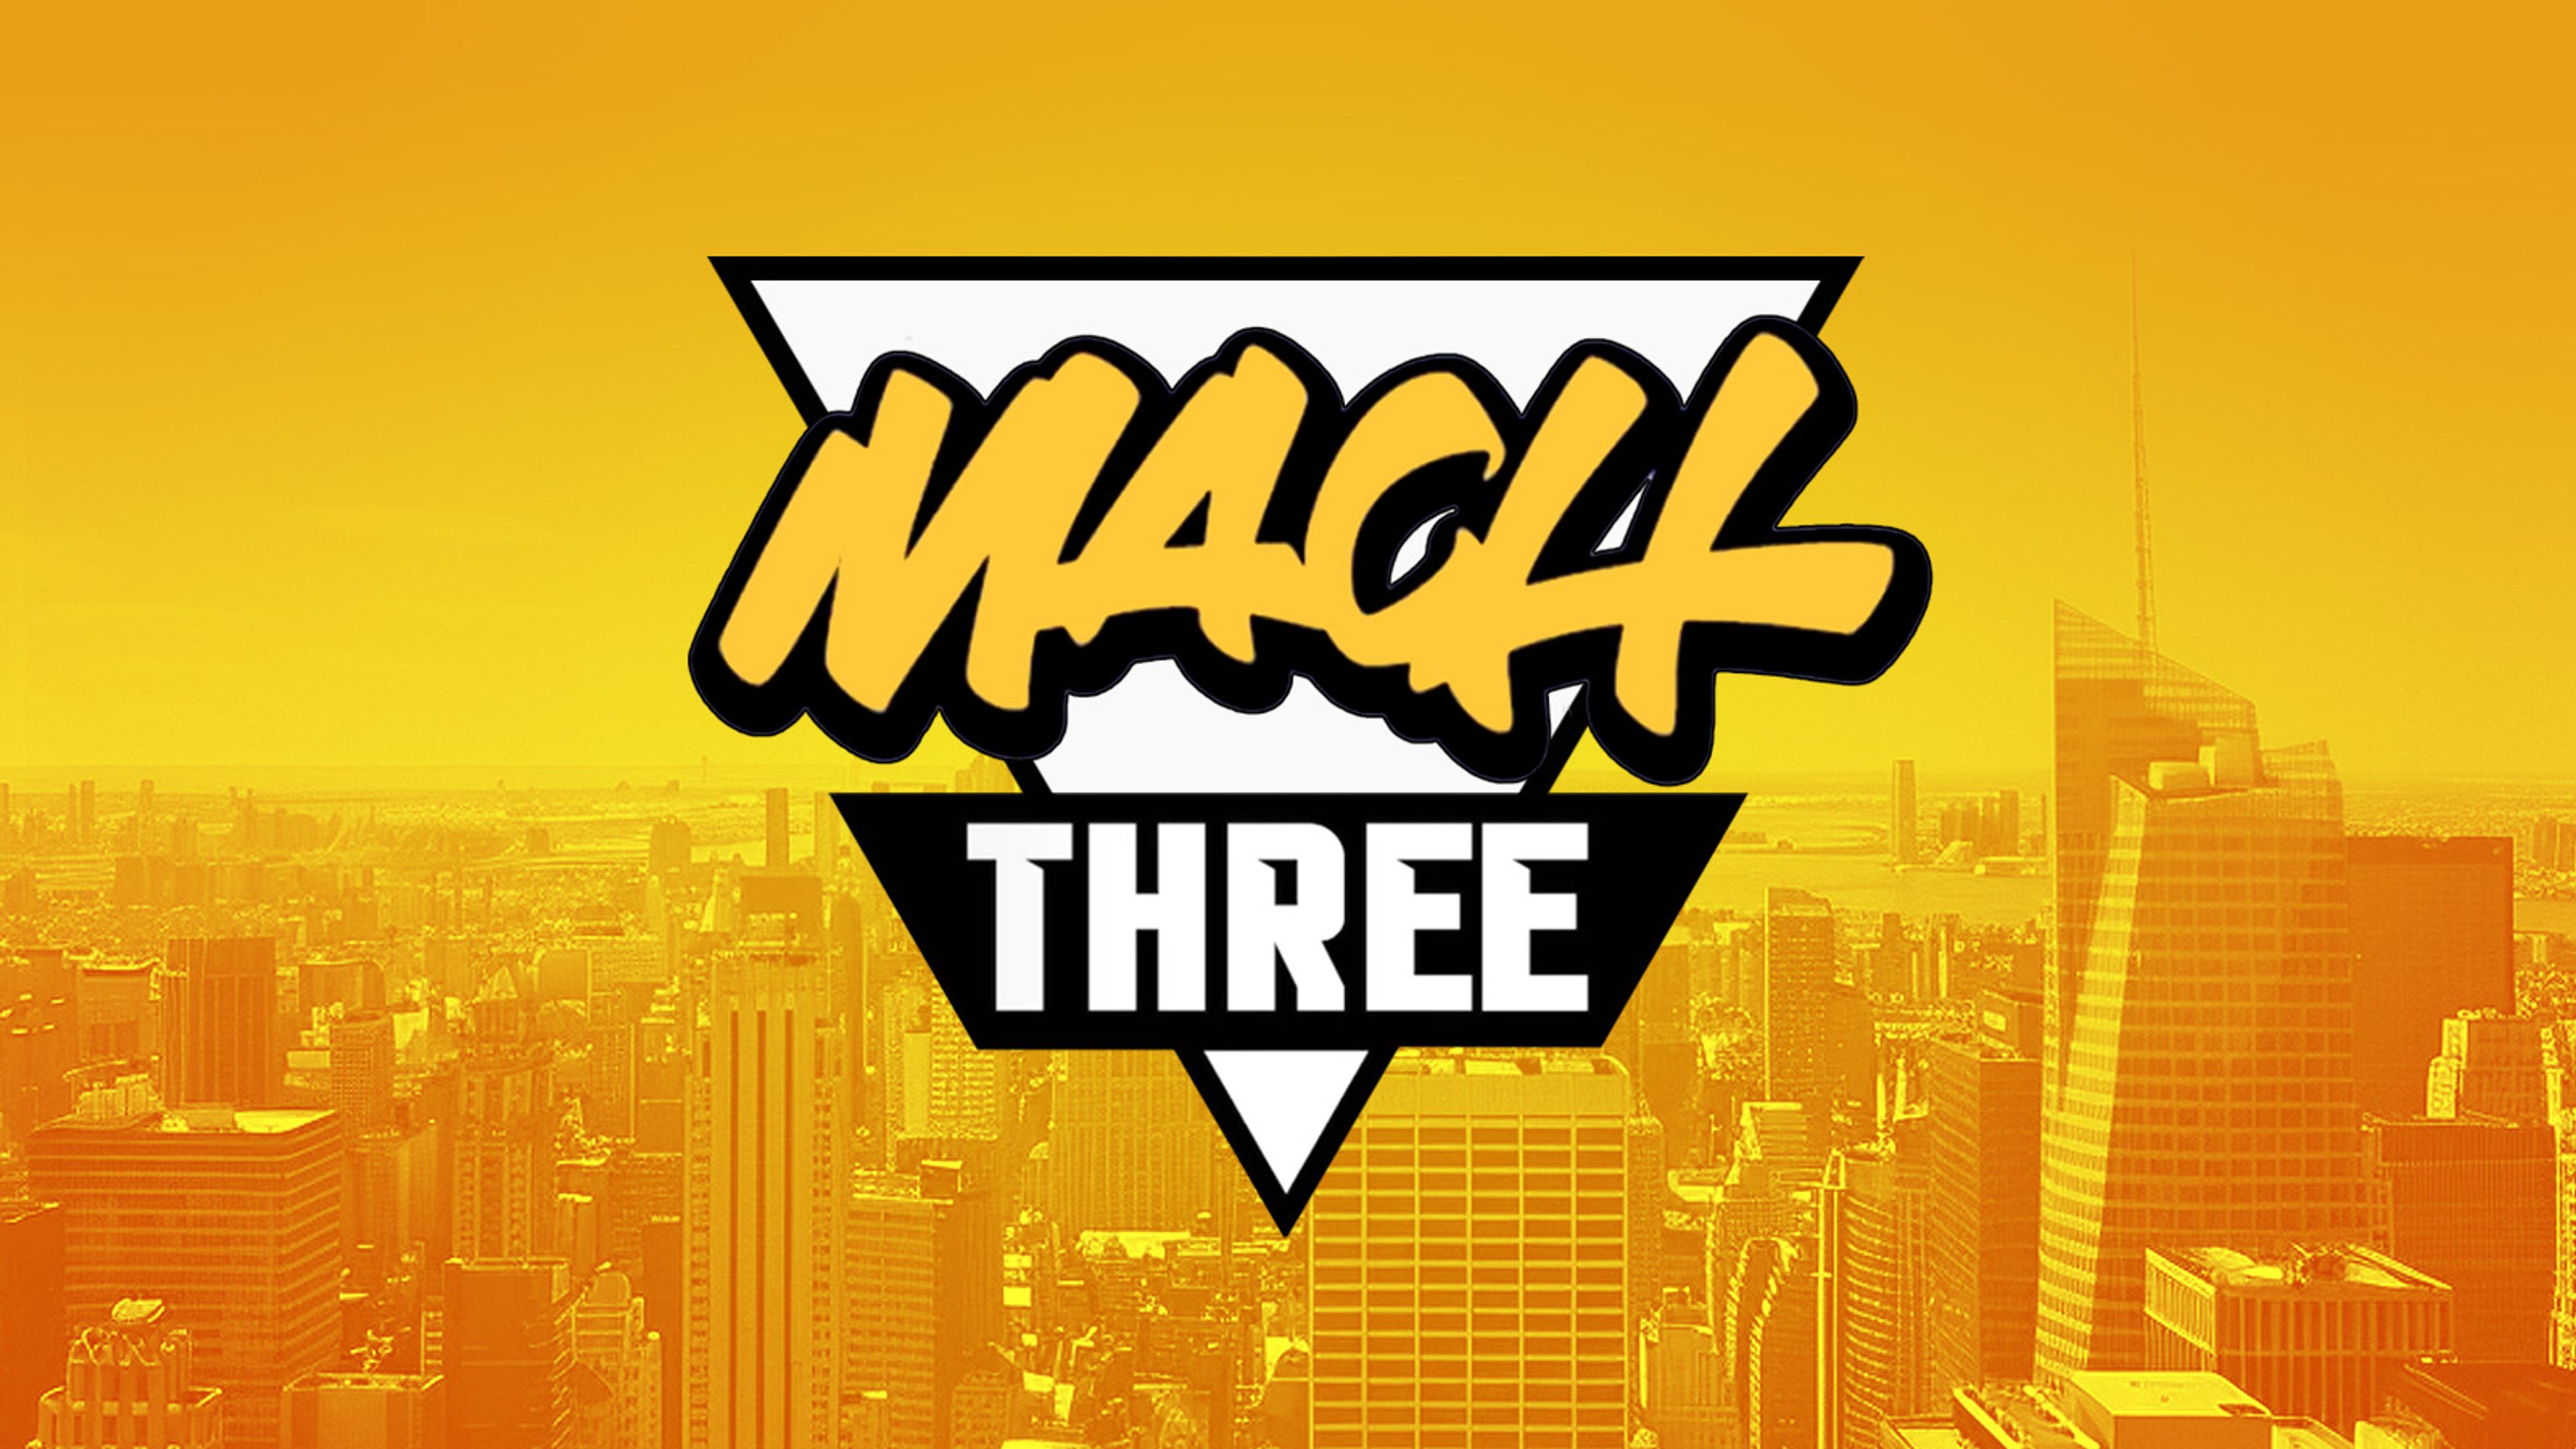 MACH THREE event logo against an image of the New York City skyline. 